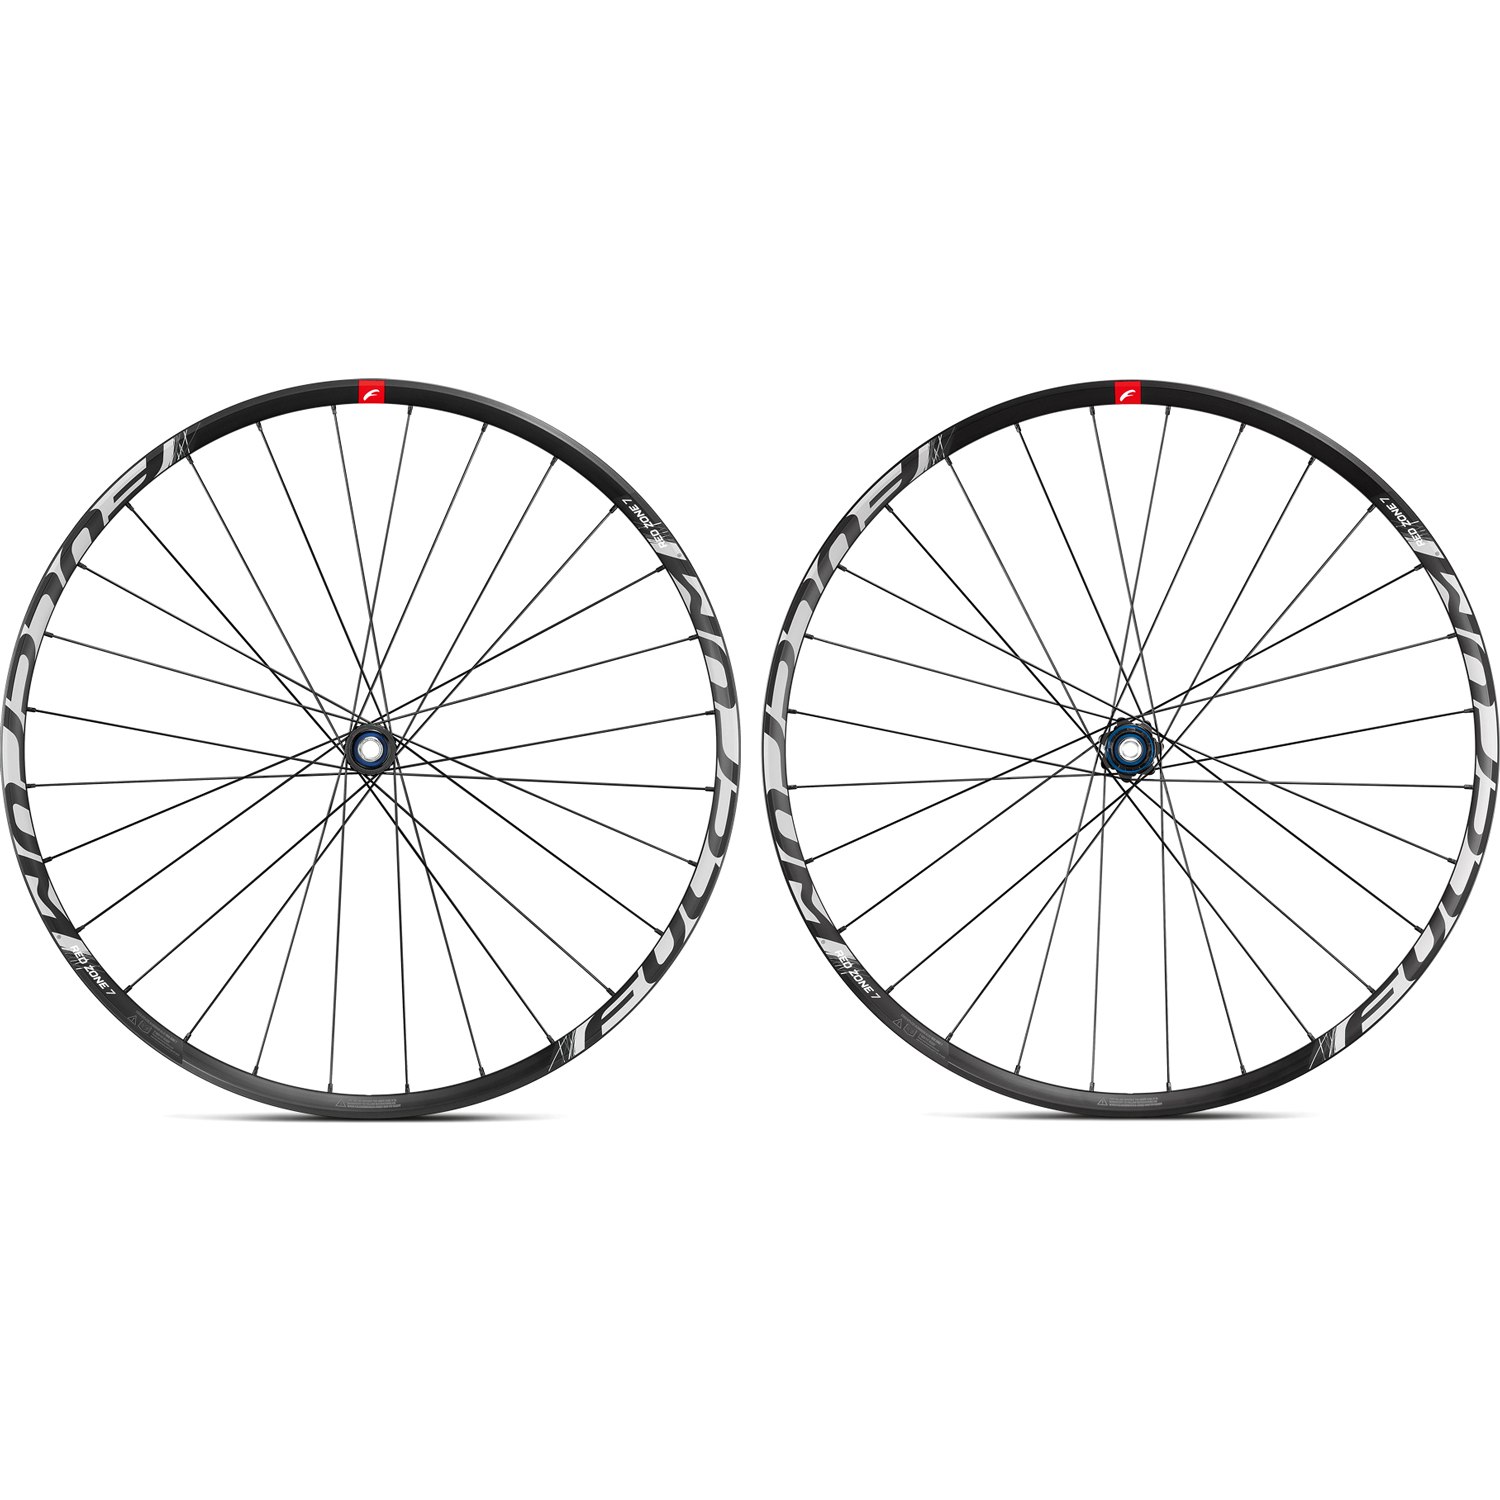 Picture of Fulcrum Red Zone 7 27.5 Inches MTB Wheelset - Centerlock - FW: 15x110mm | RW: 12x148mm Boost